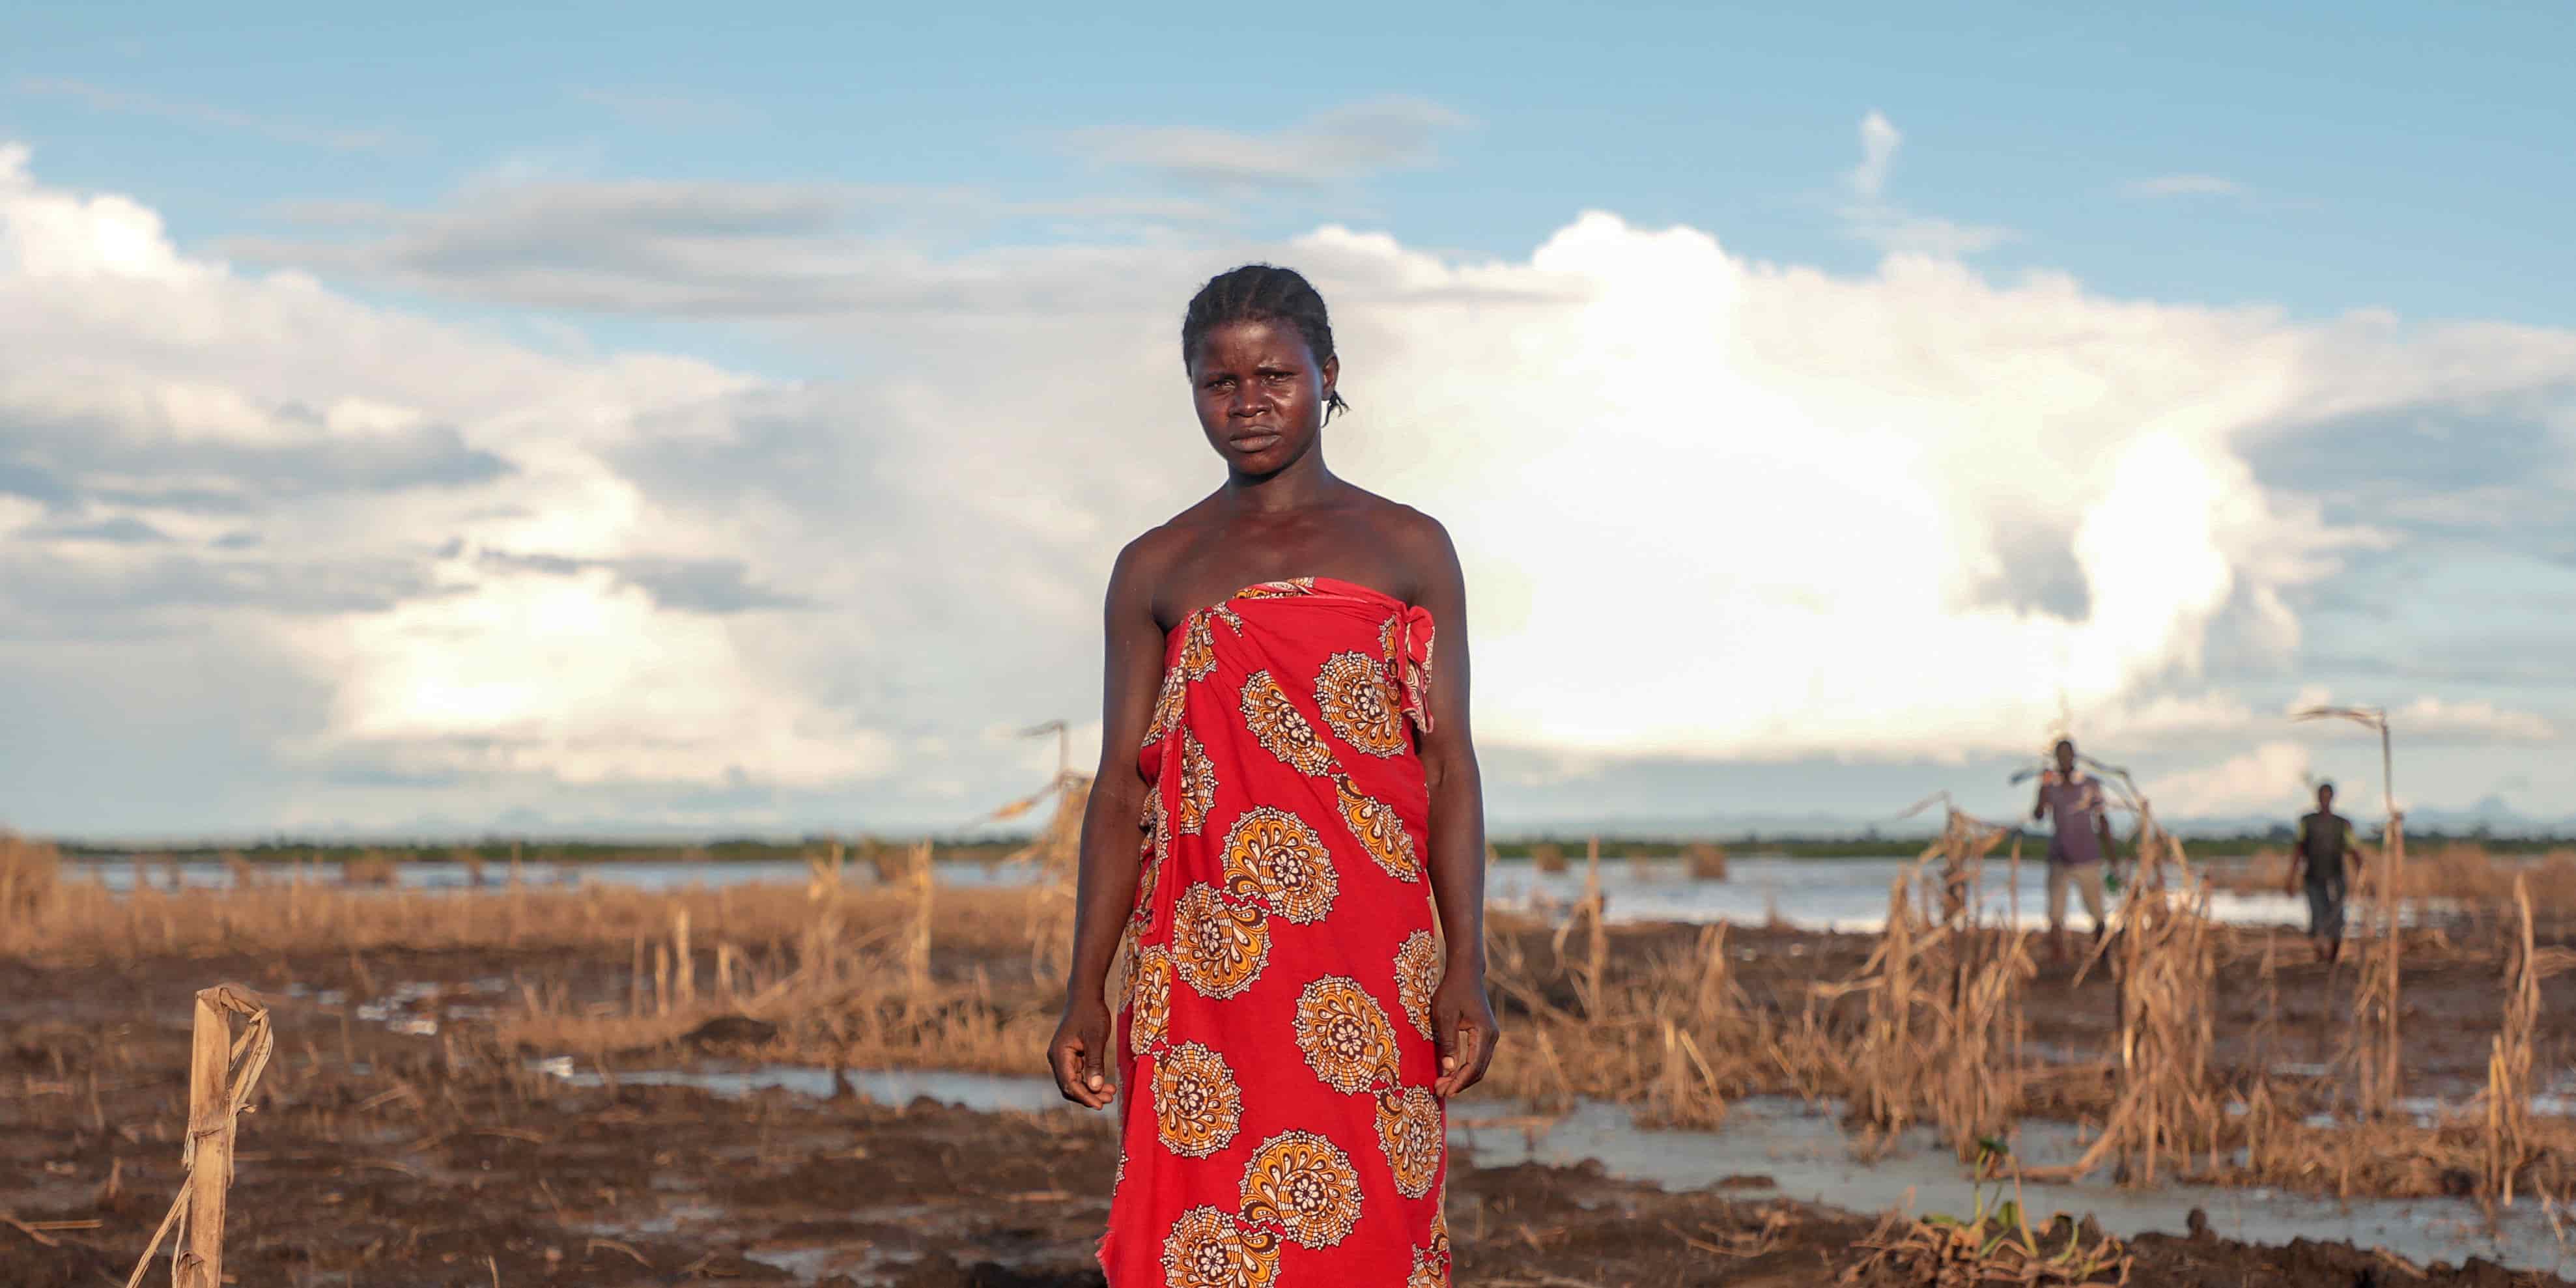 A Malawi farmer inspects what is left of her field after flooding